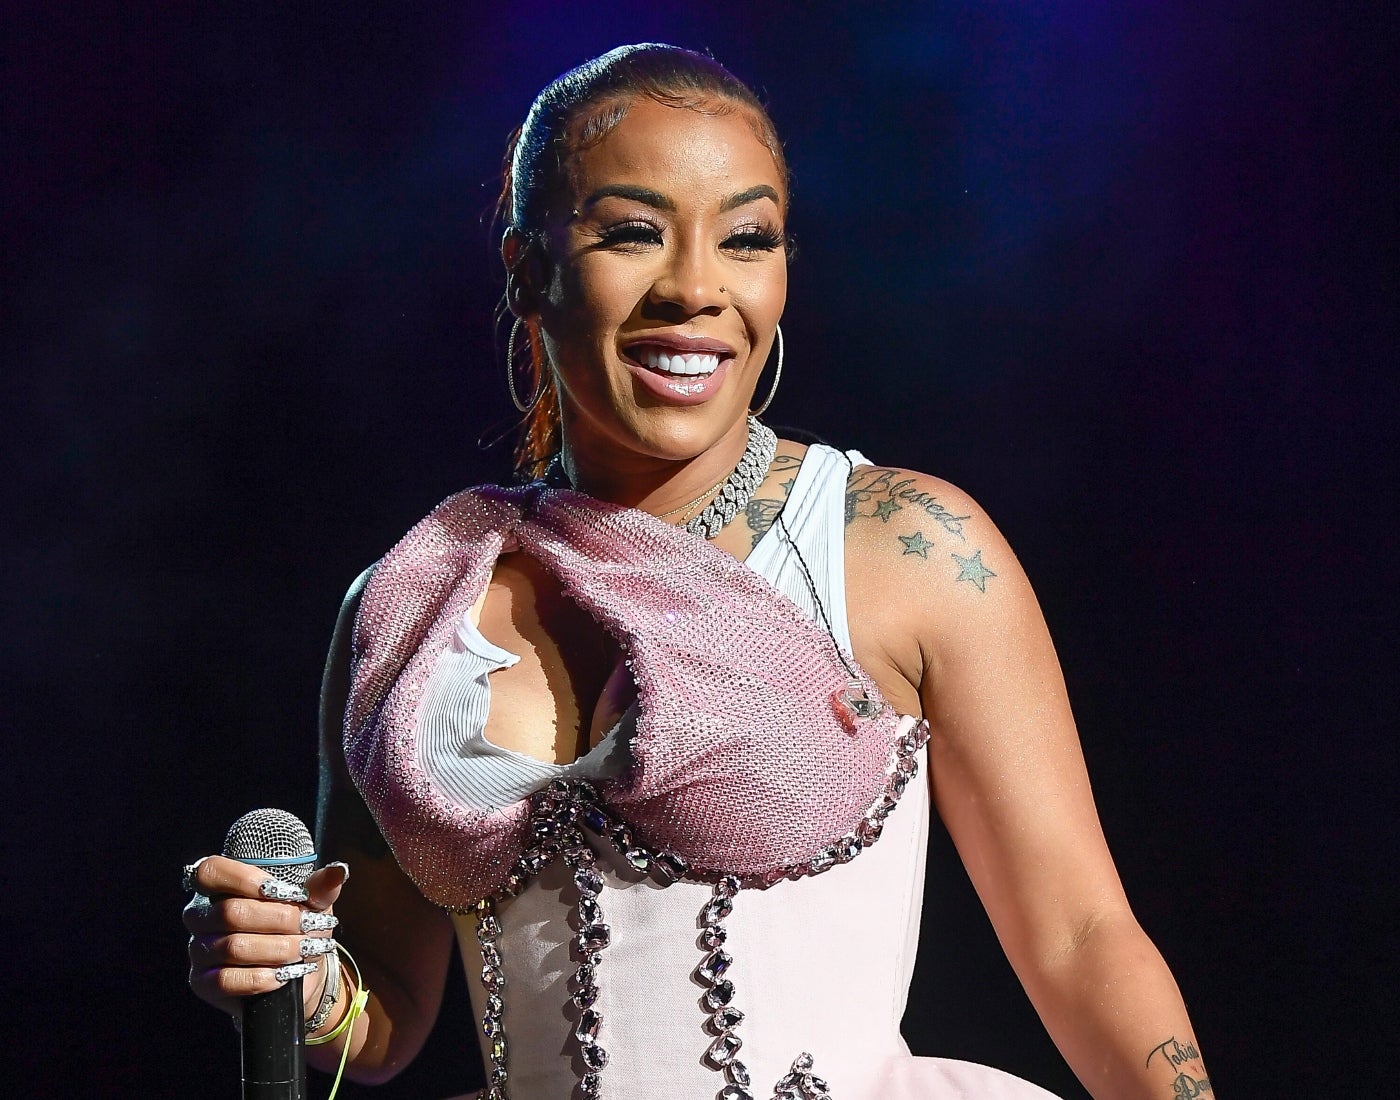 Exclusive!! R&B Singer songwriter Keyshia Cole goes jogging with a